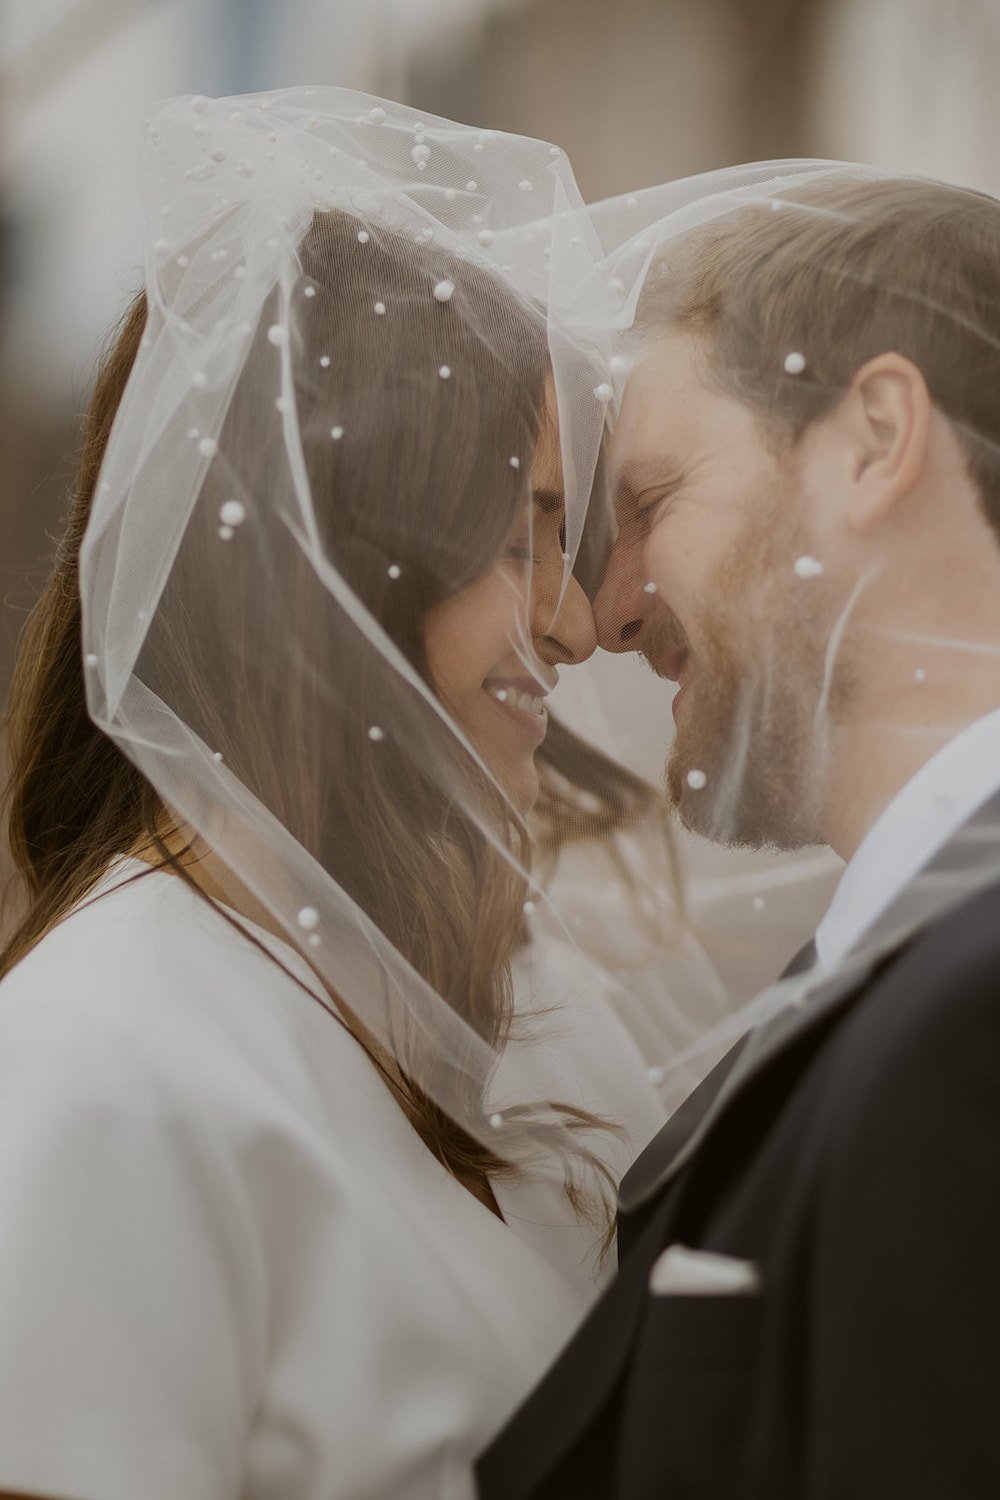 The couple share a moment together under her pearl veil.